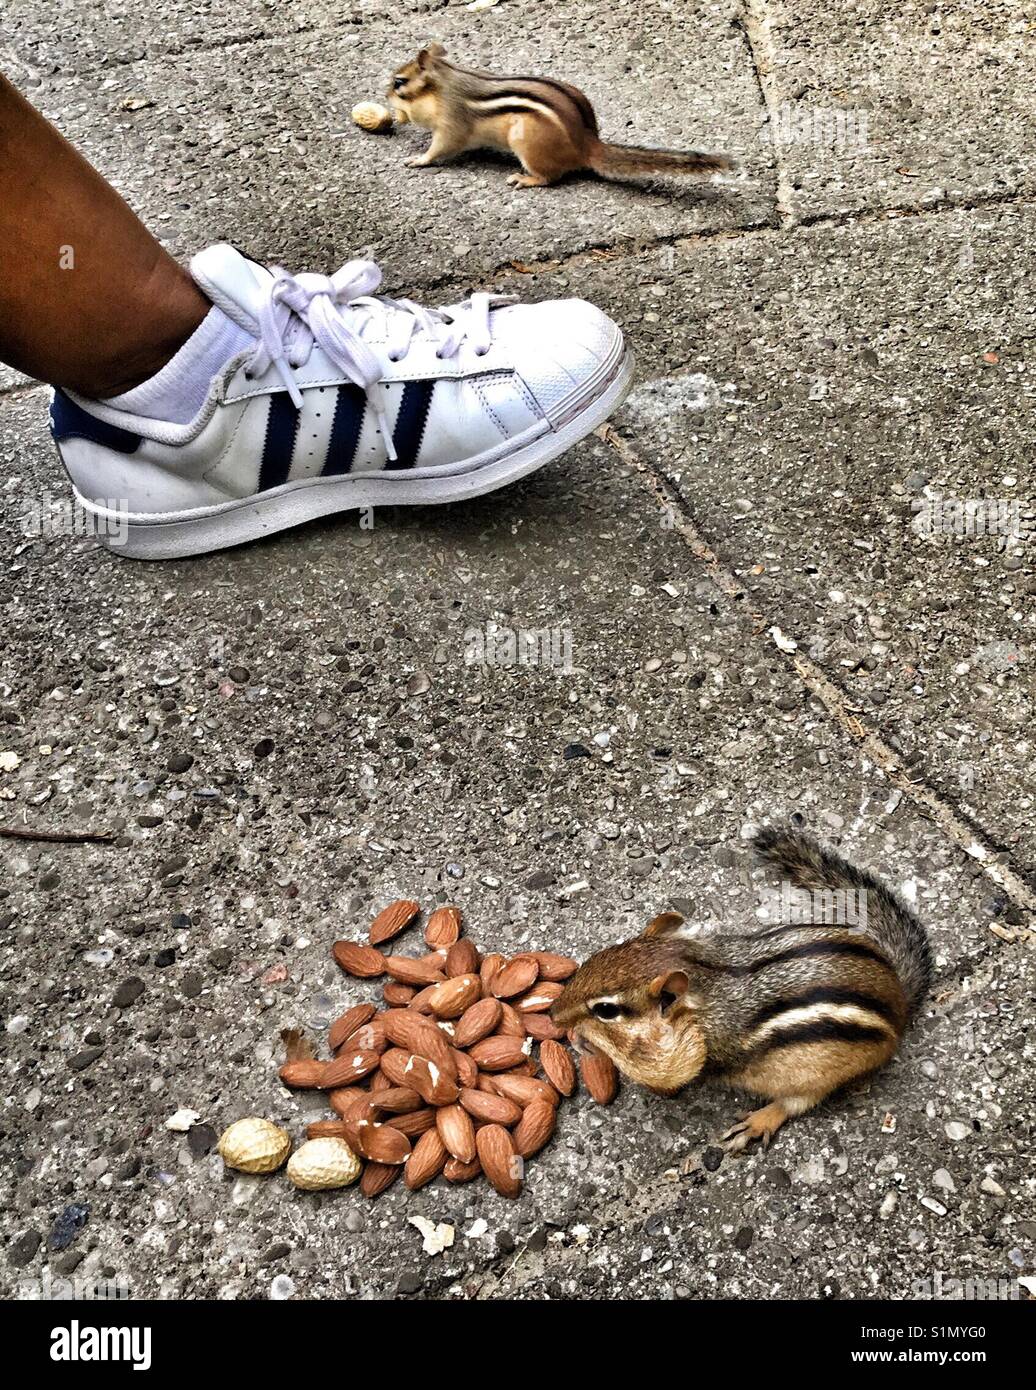 A park goer stops to feed the chipmunks. Stock Photo